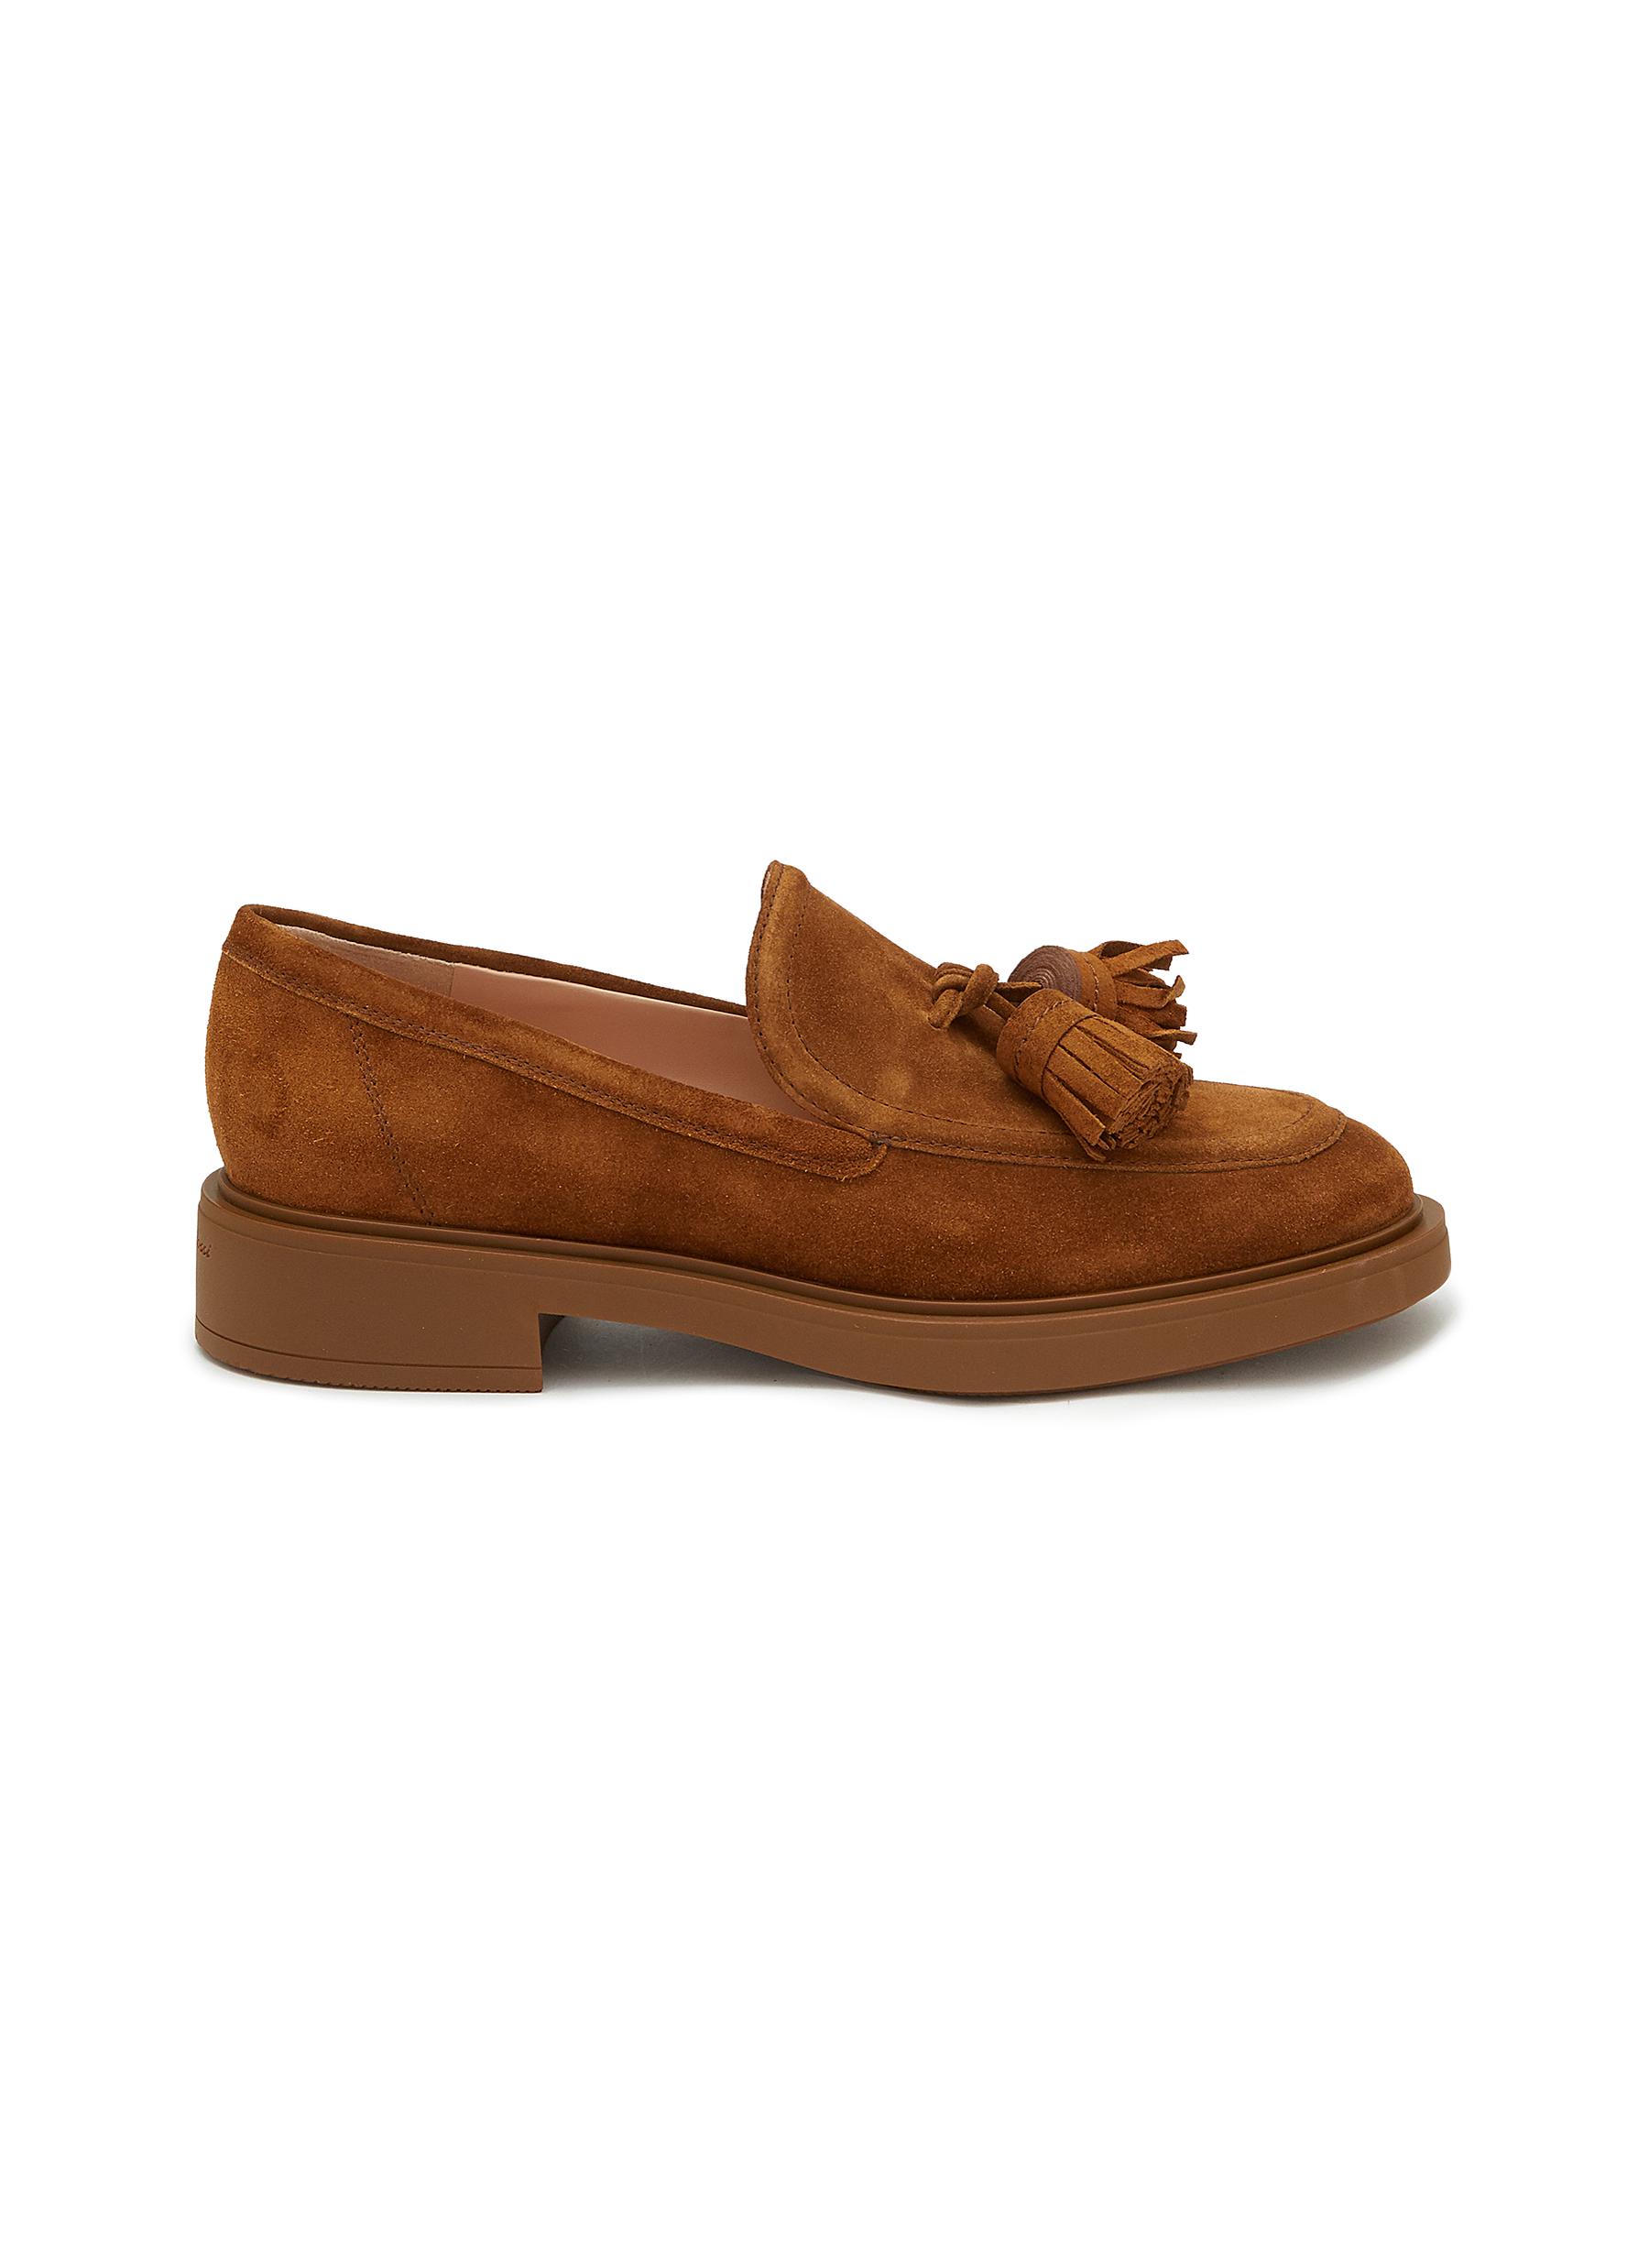 Suede Tasselled Loafers